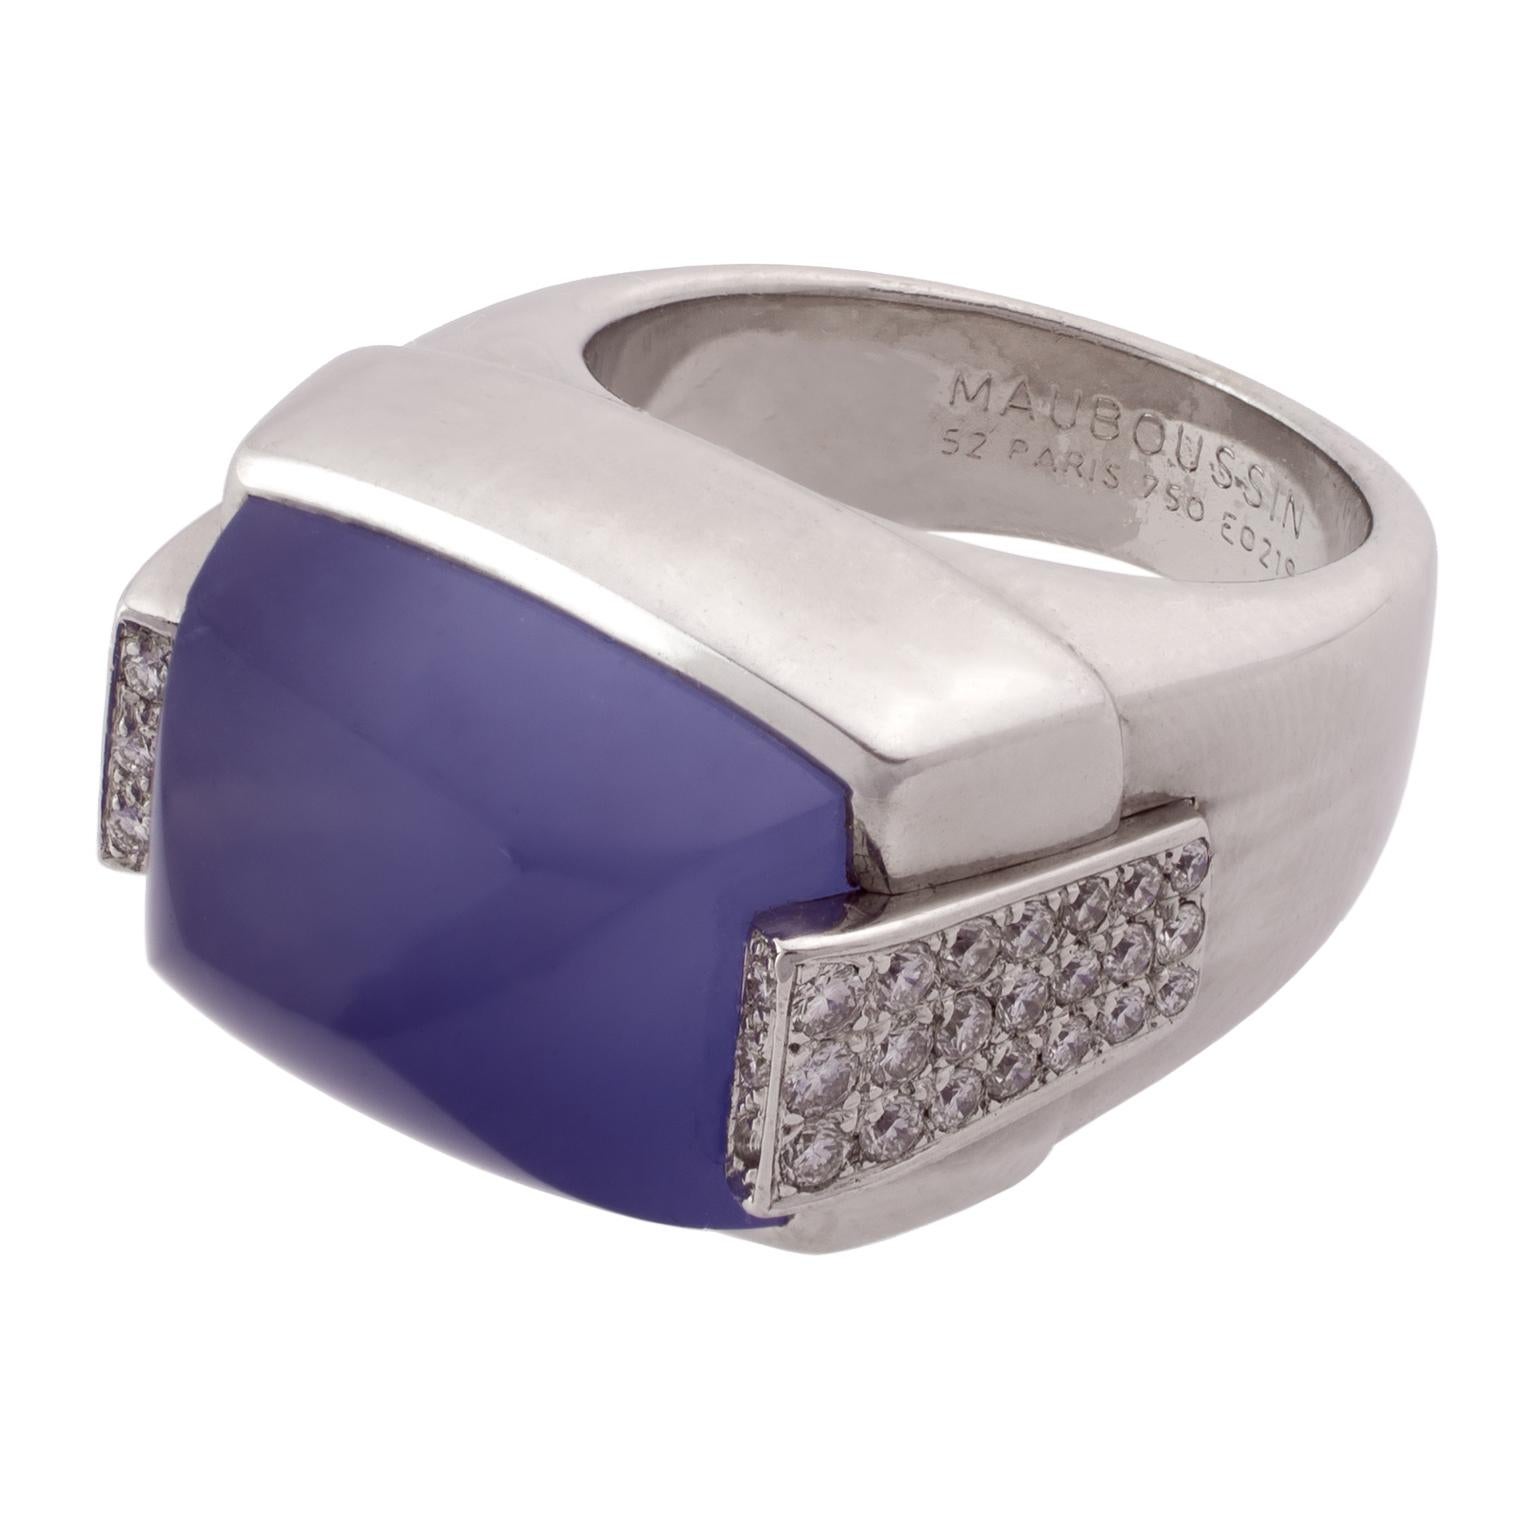 Mauboussin ring in white gold centered by a cabochon cut iolite, accented with an estimated 0.65 carats in round brilliant diamonds on the arms of the ring.
Size: Swiss 13, French 53, US 6 1/2